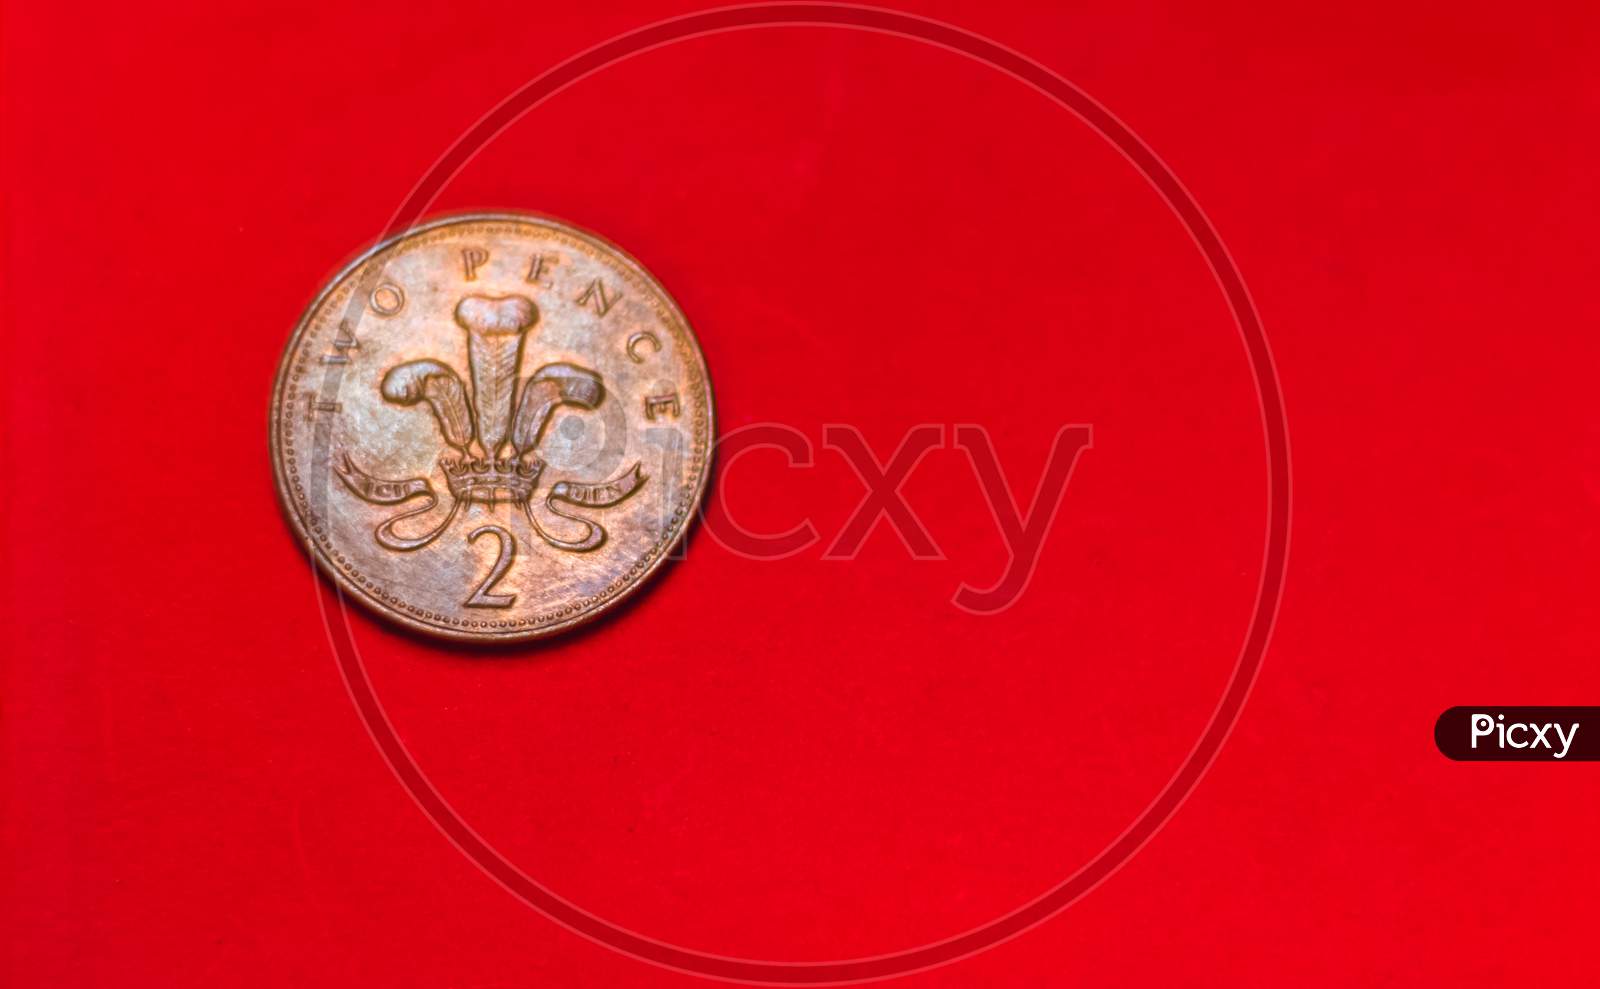 British Coin 2 Pence (2001) Isolated On Red Background With Blurry And Space For Copy Text. Front Side Of Two Pence Coin. Coins Collectors Wolrdwide.